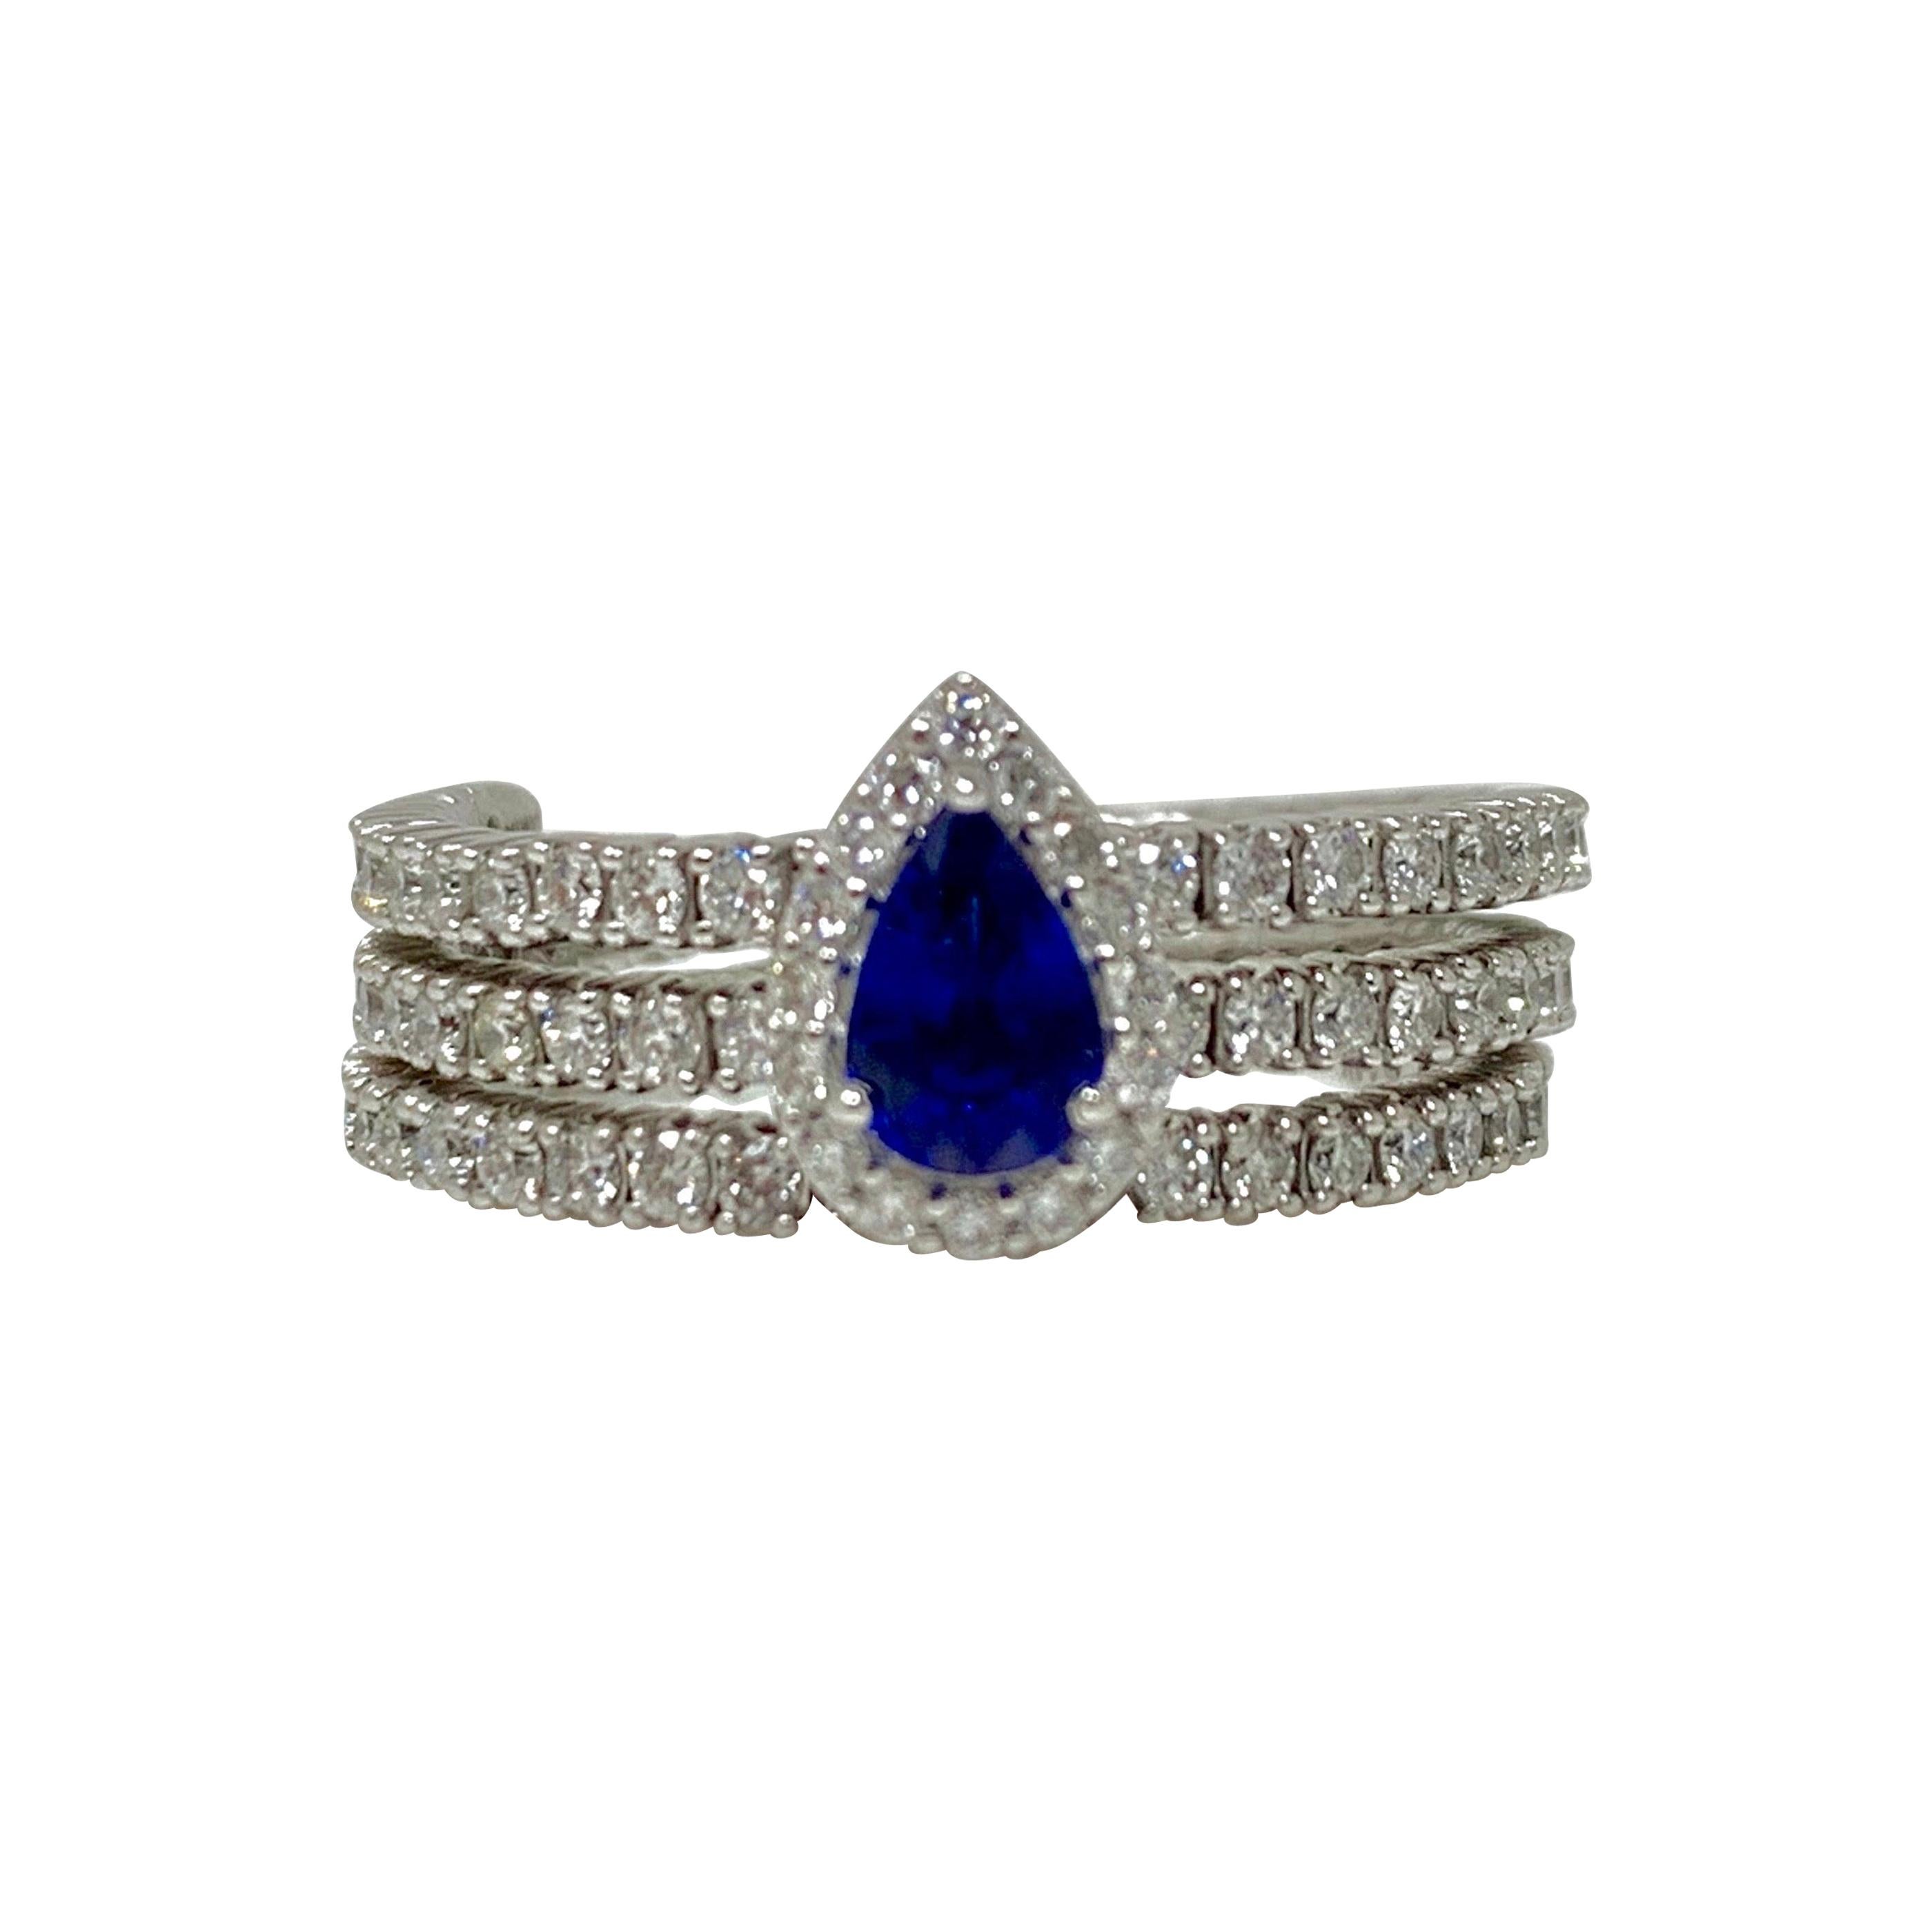 Blue Sapphire and Diamond Flexible Ring in 14 Karat White Gold. For Sale